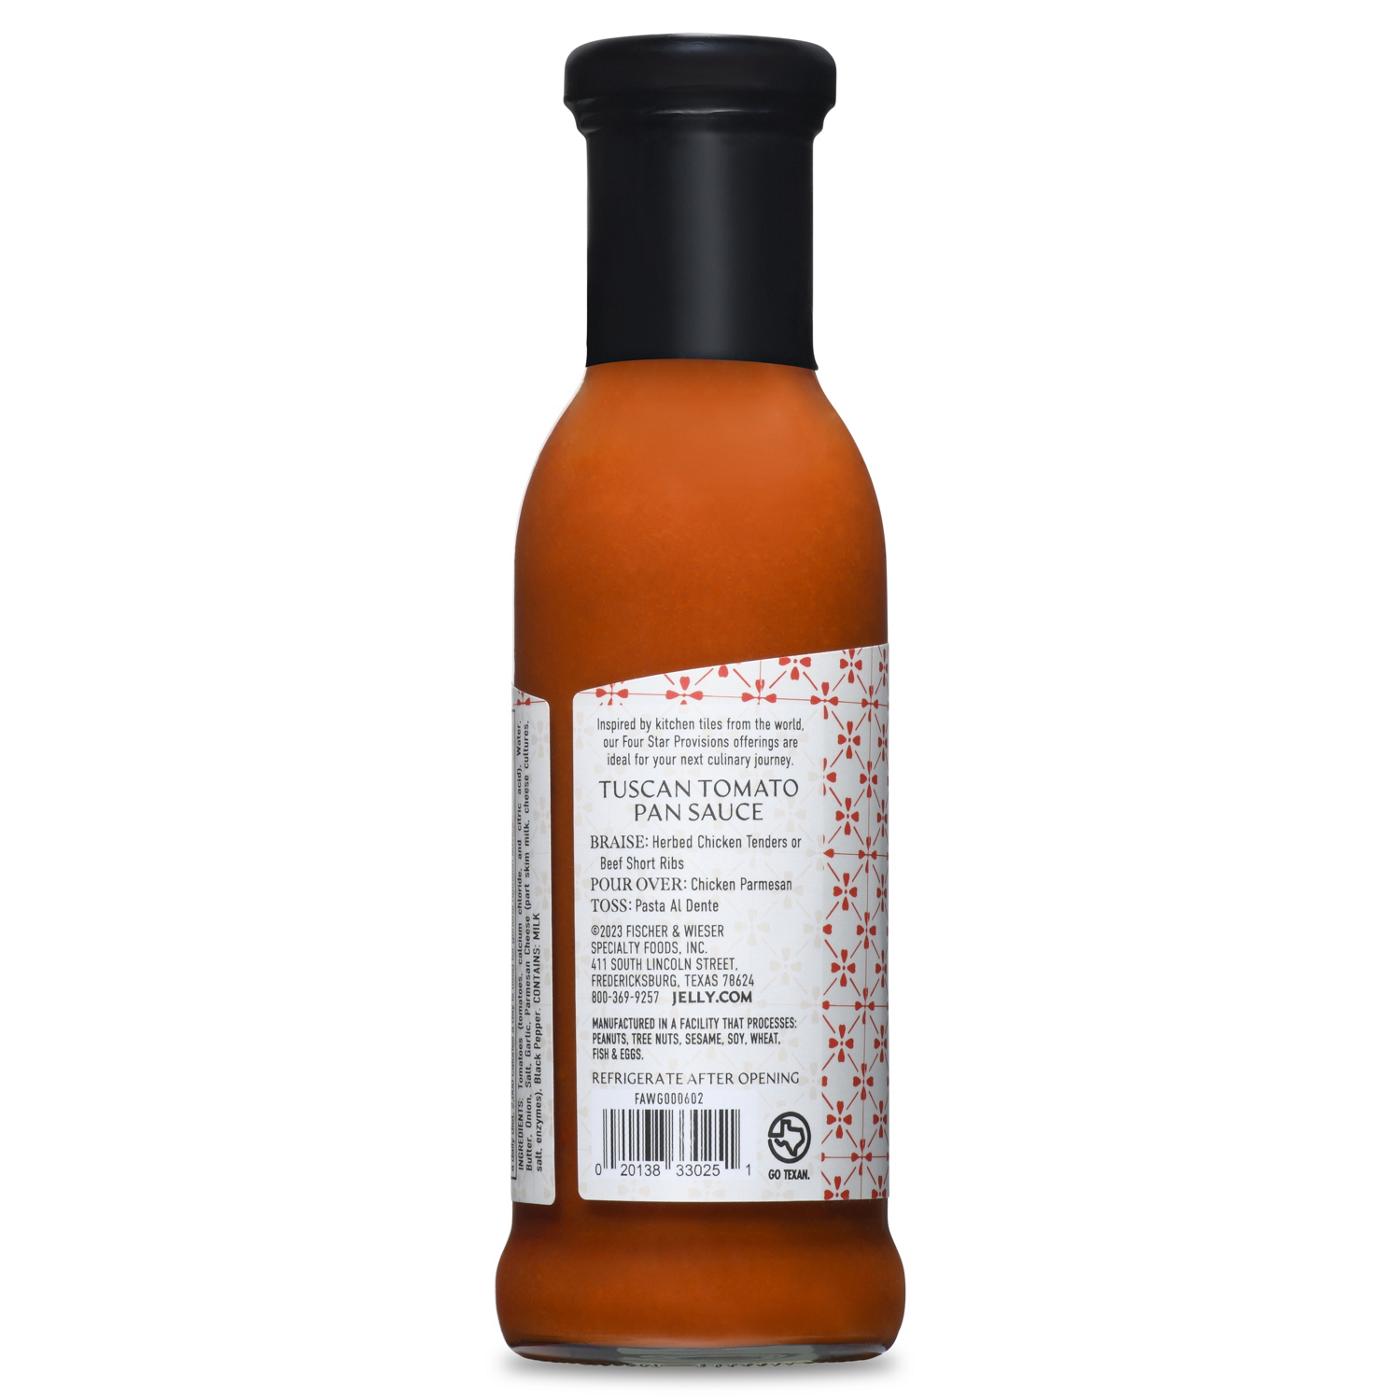 Fischer & Wieser Four Star Provisions Tuscan Tomato Pan Sauce; image 2 of 3